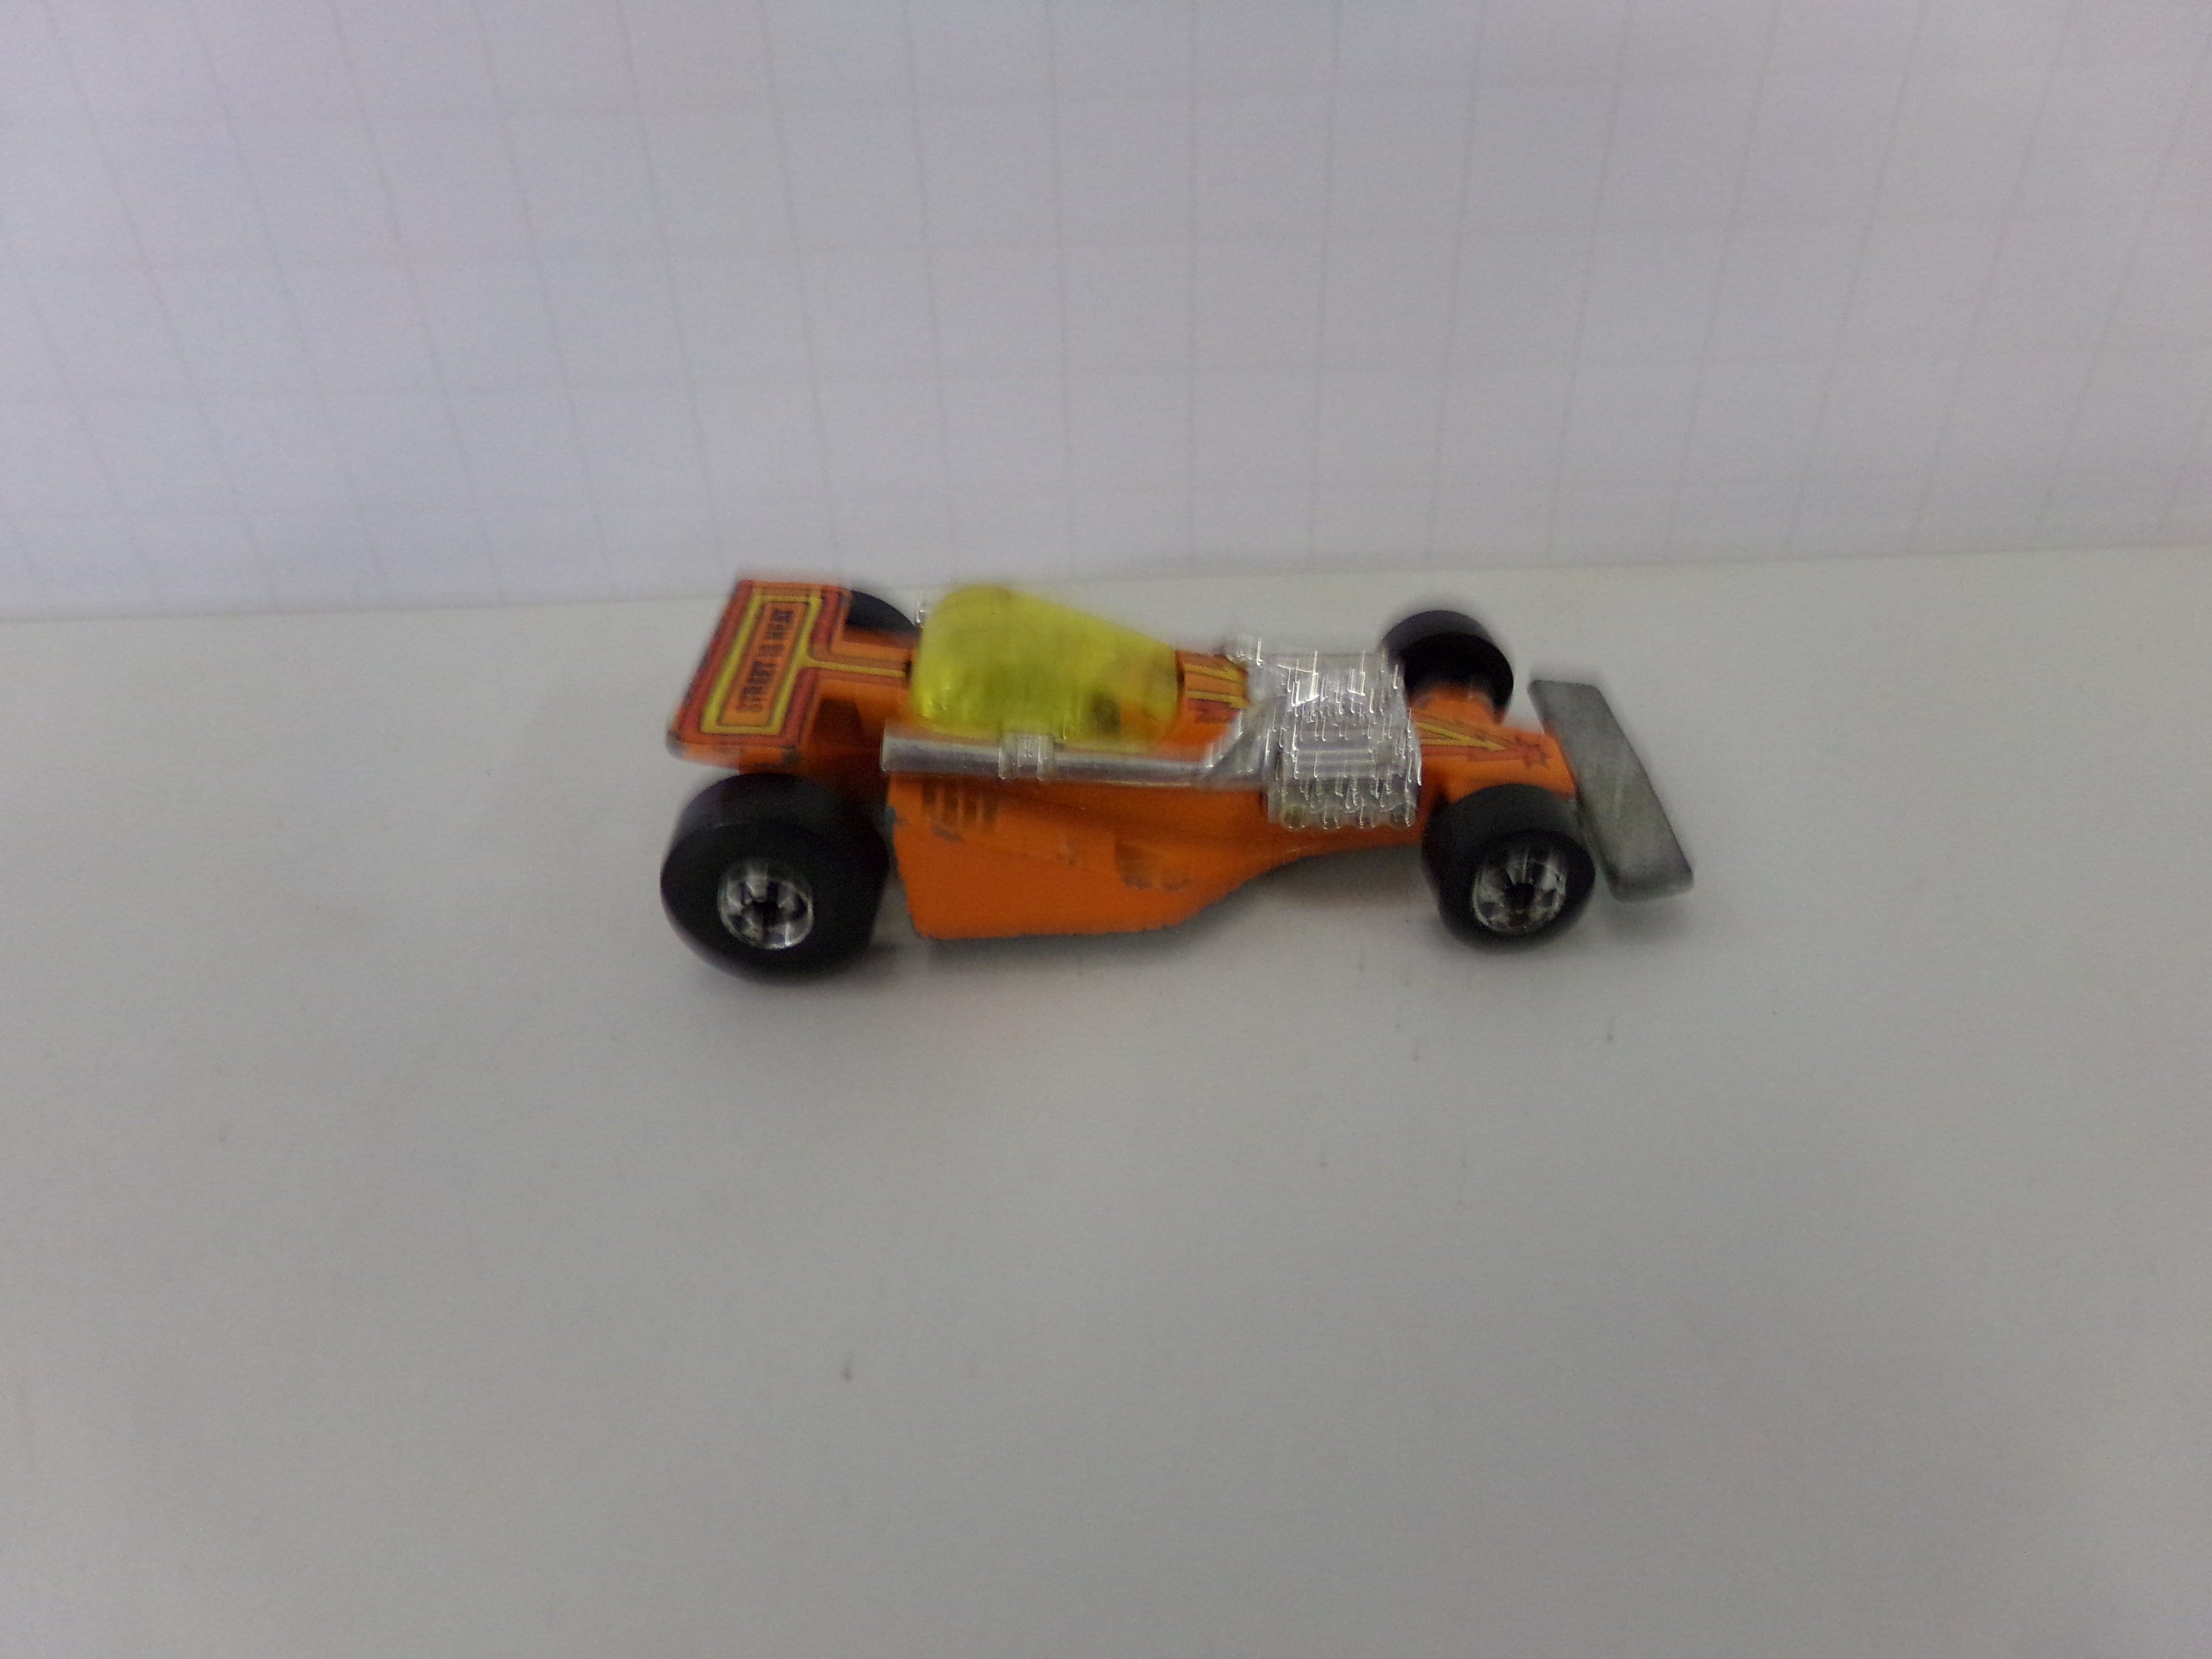 Vintage 1981 Hot Wheels Land Lord Diecast Car Scale 1:64